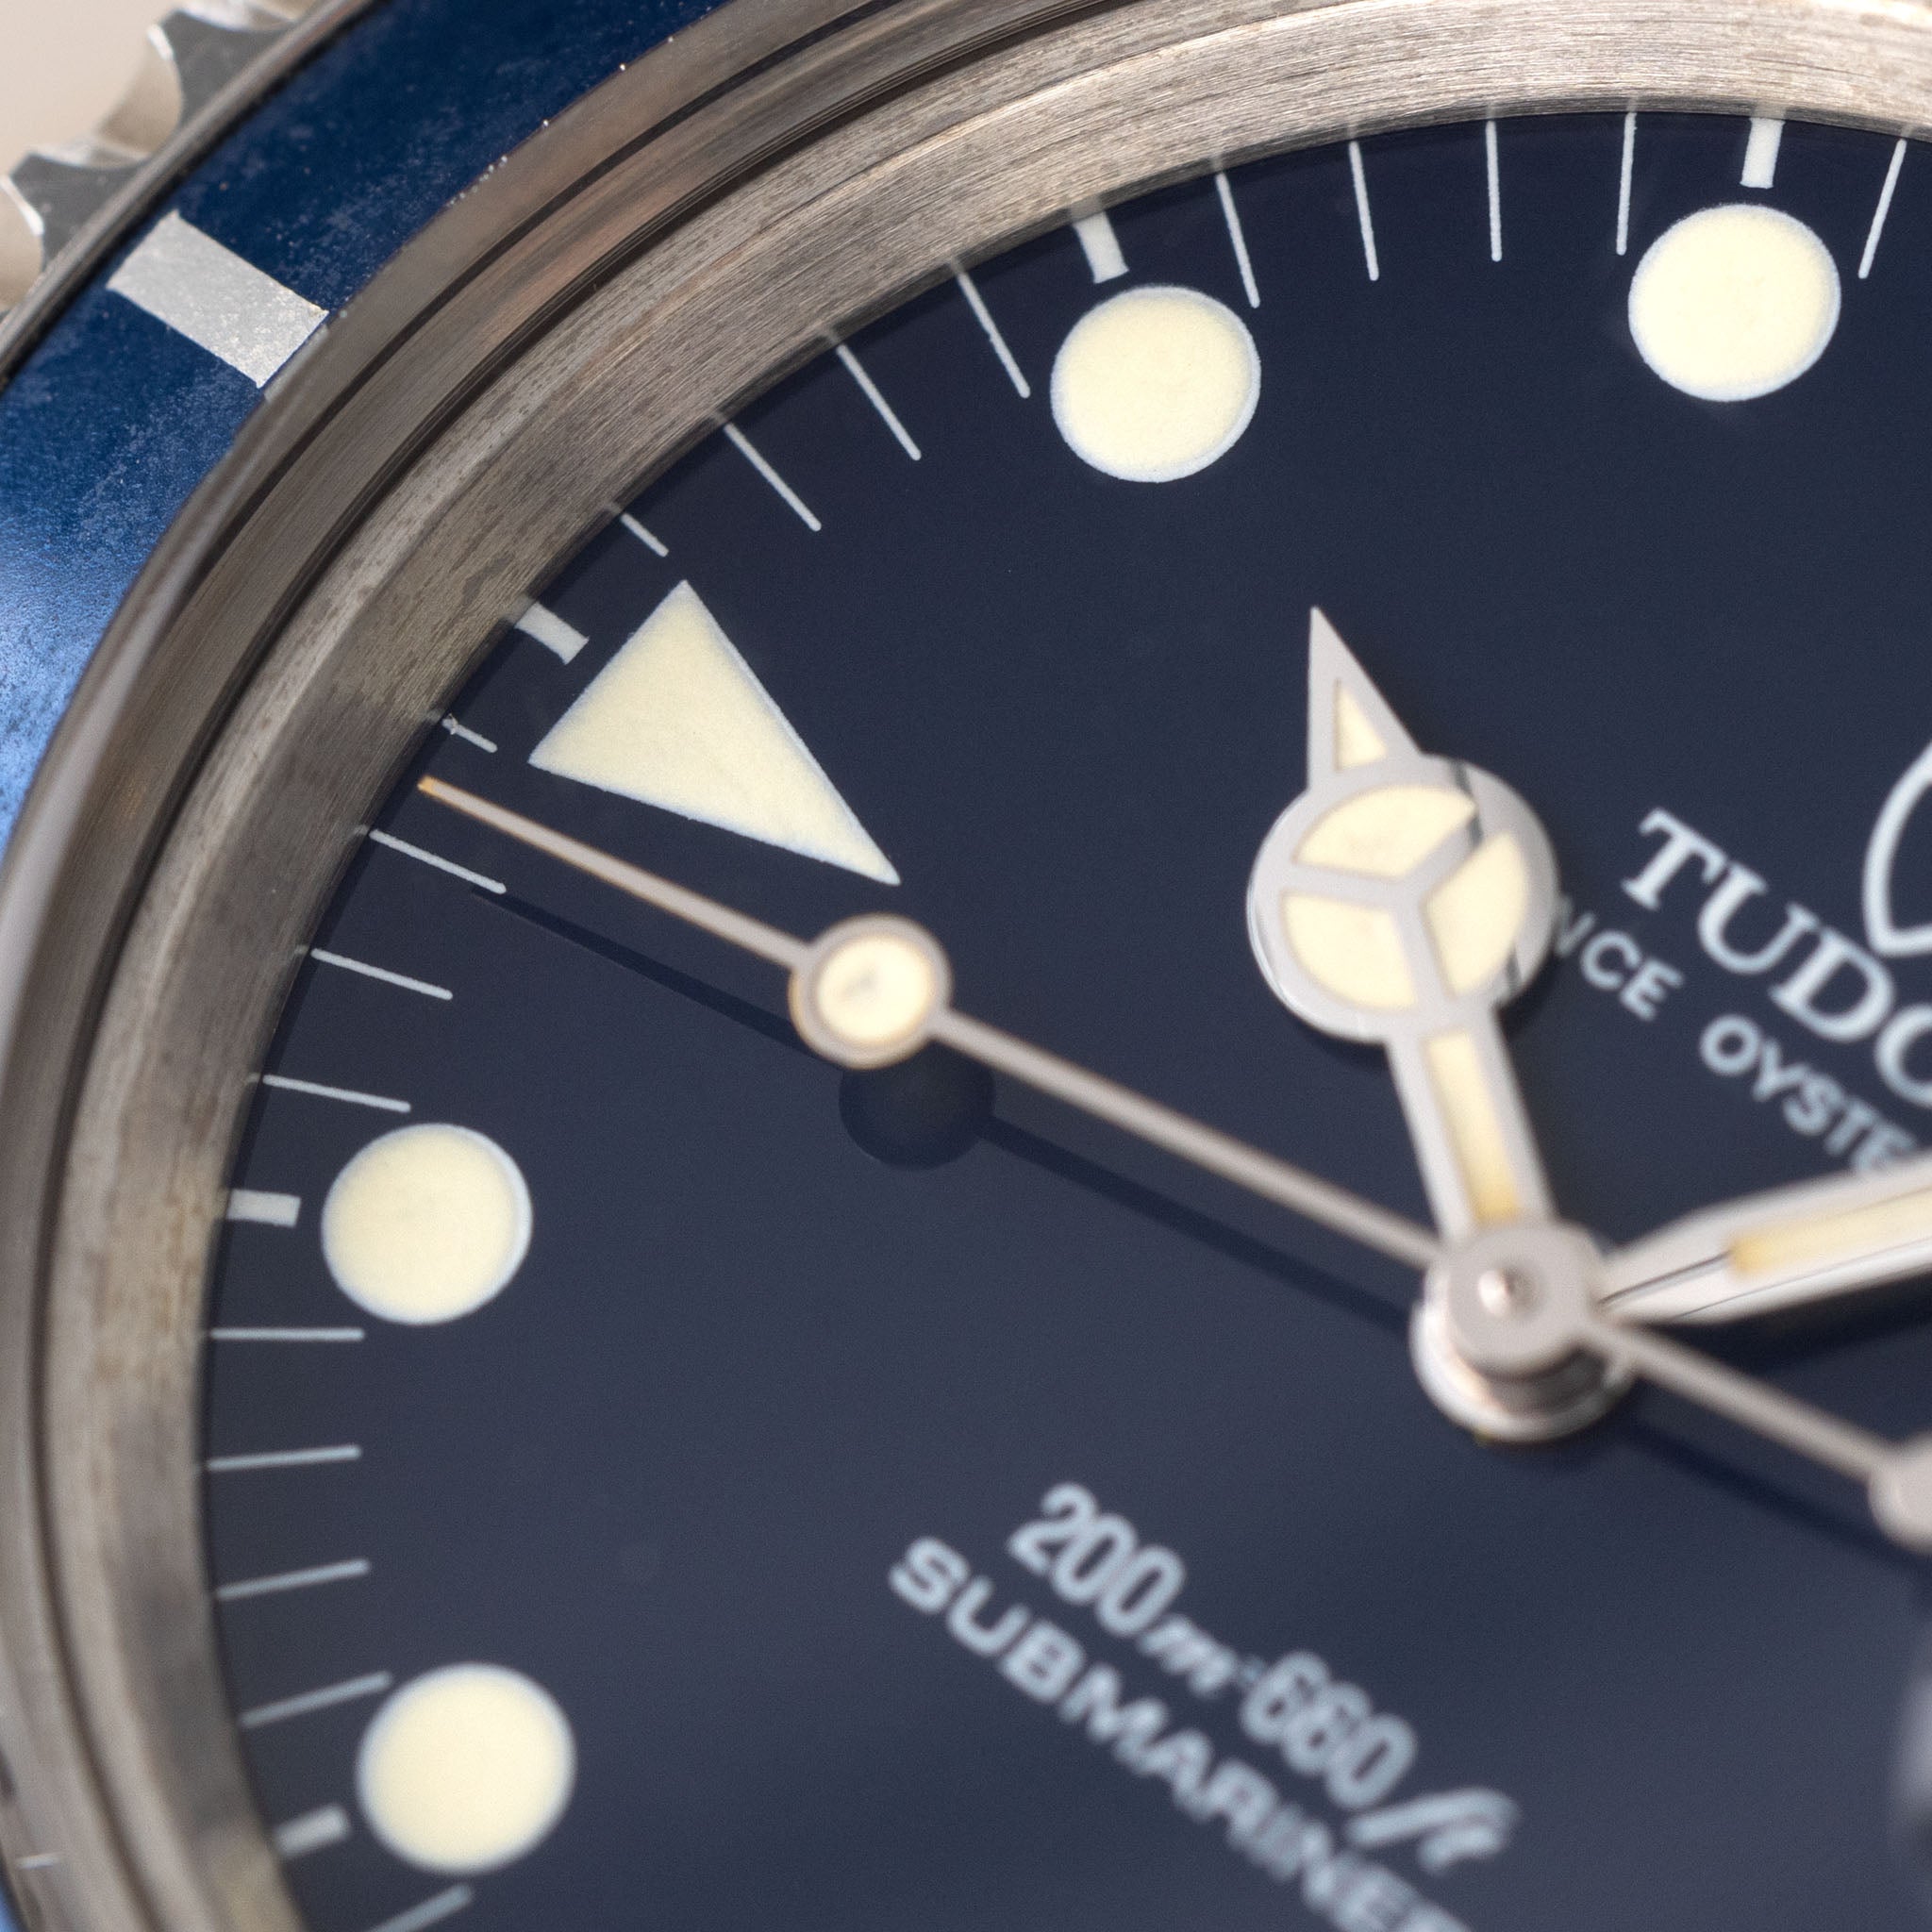 Tudor Submariner Date Blue Dial Box and Accessories Ref 79090